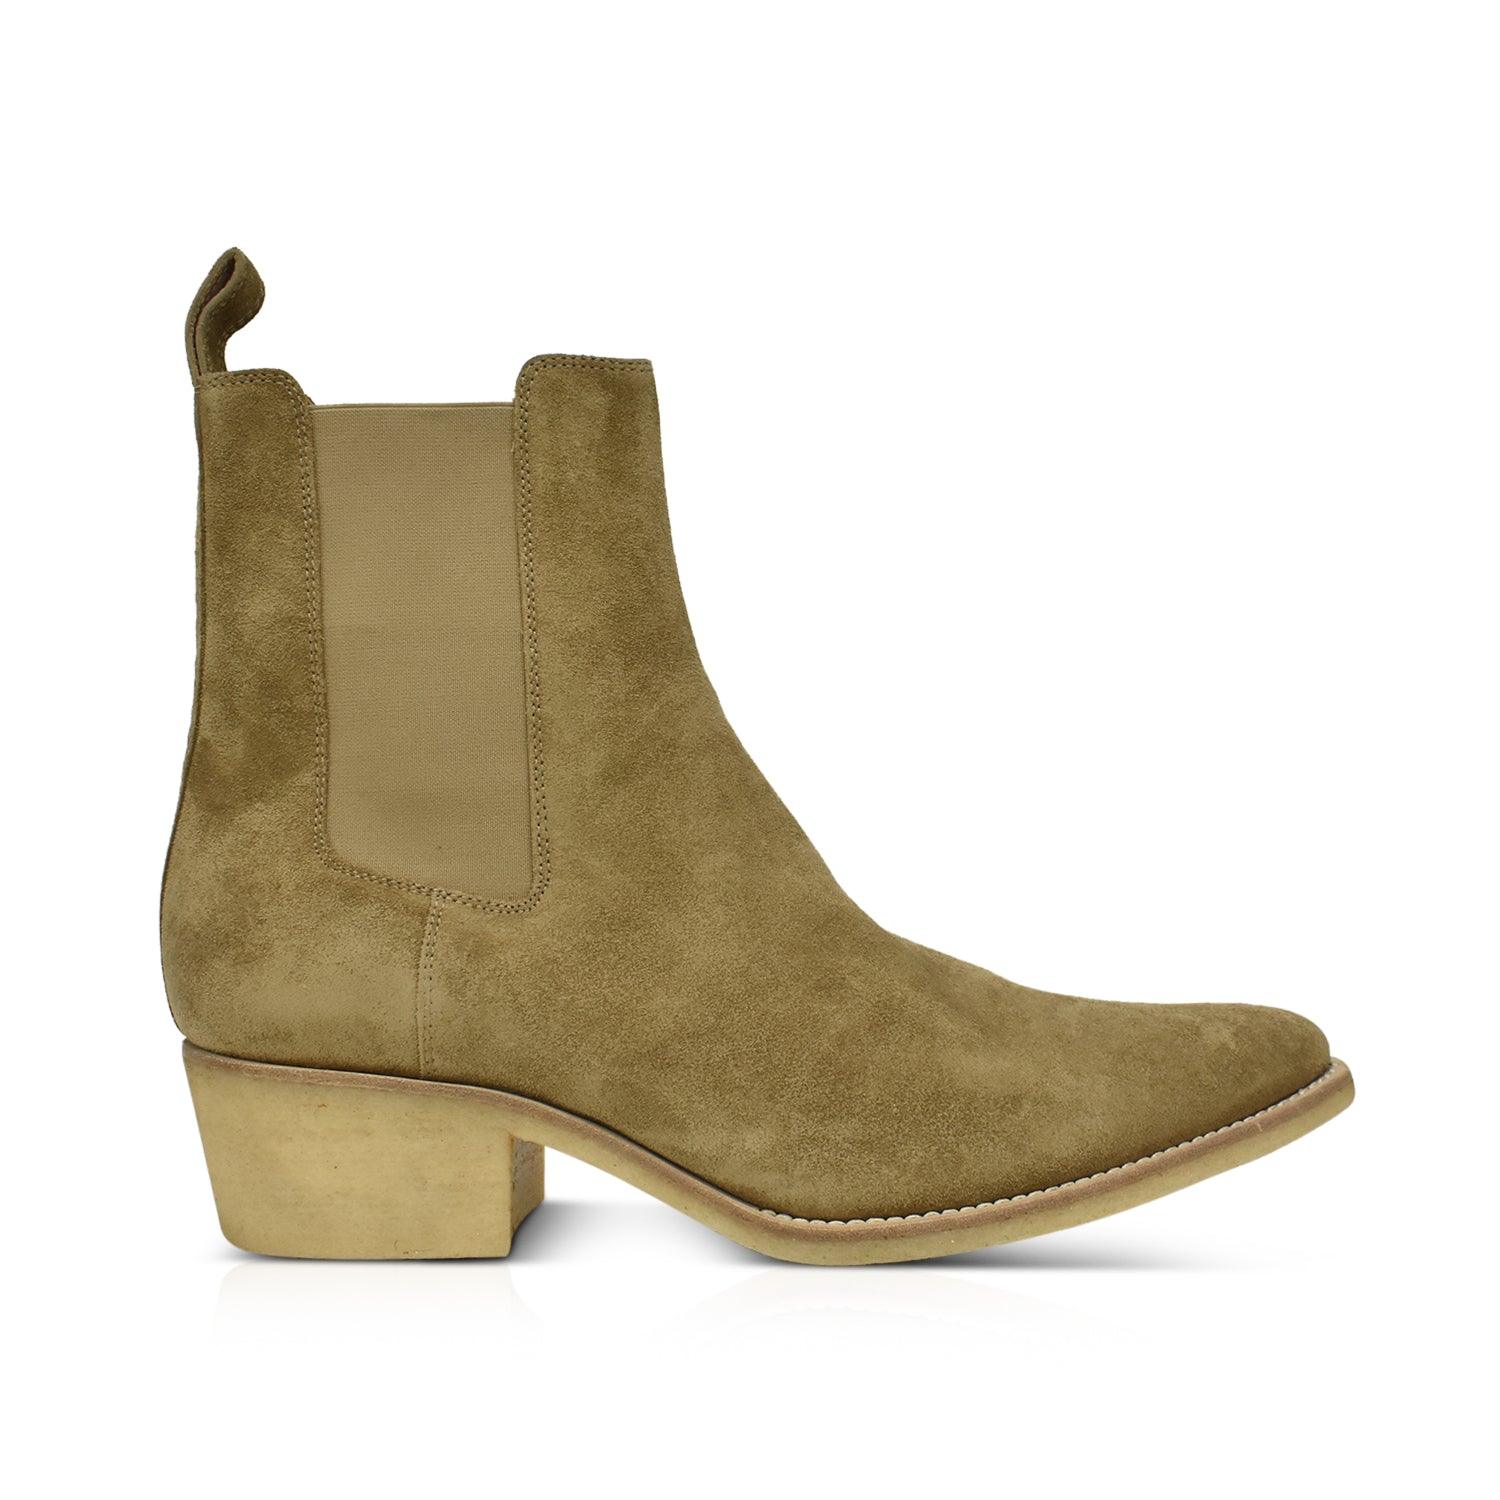 Amiri 'Chelsea' Boots - Men's 44.5 - Fashionably Yours